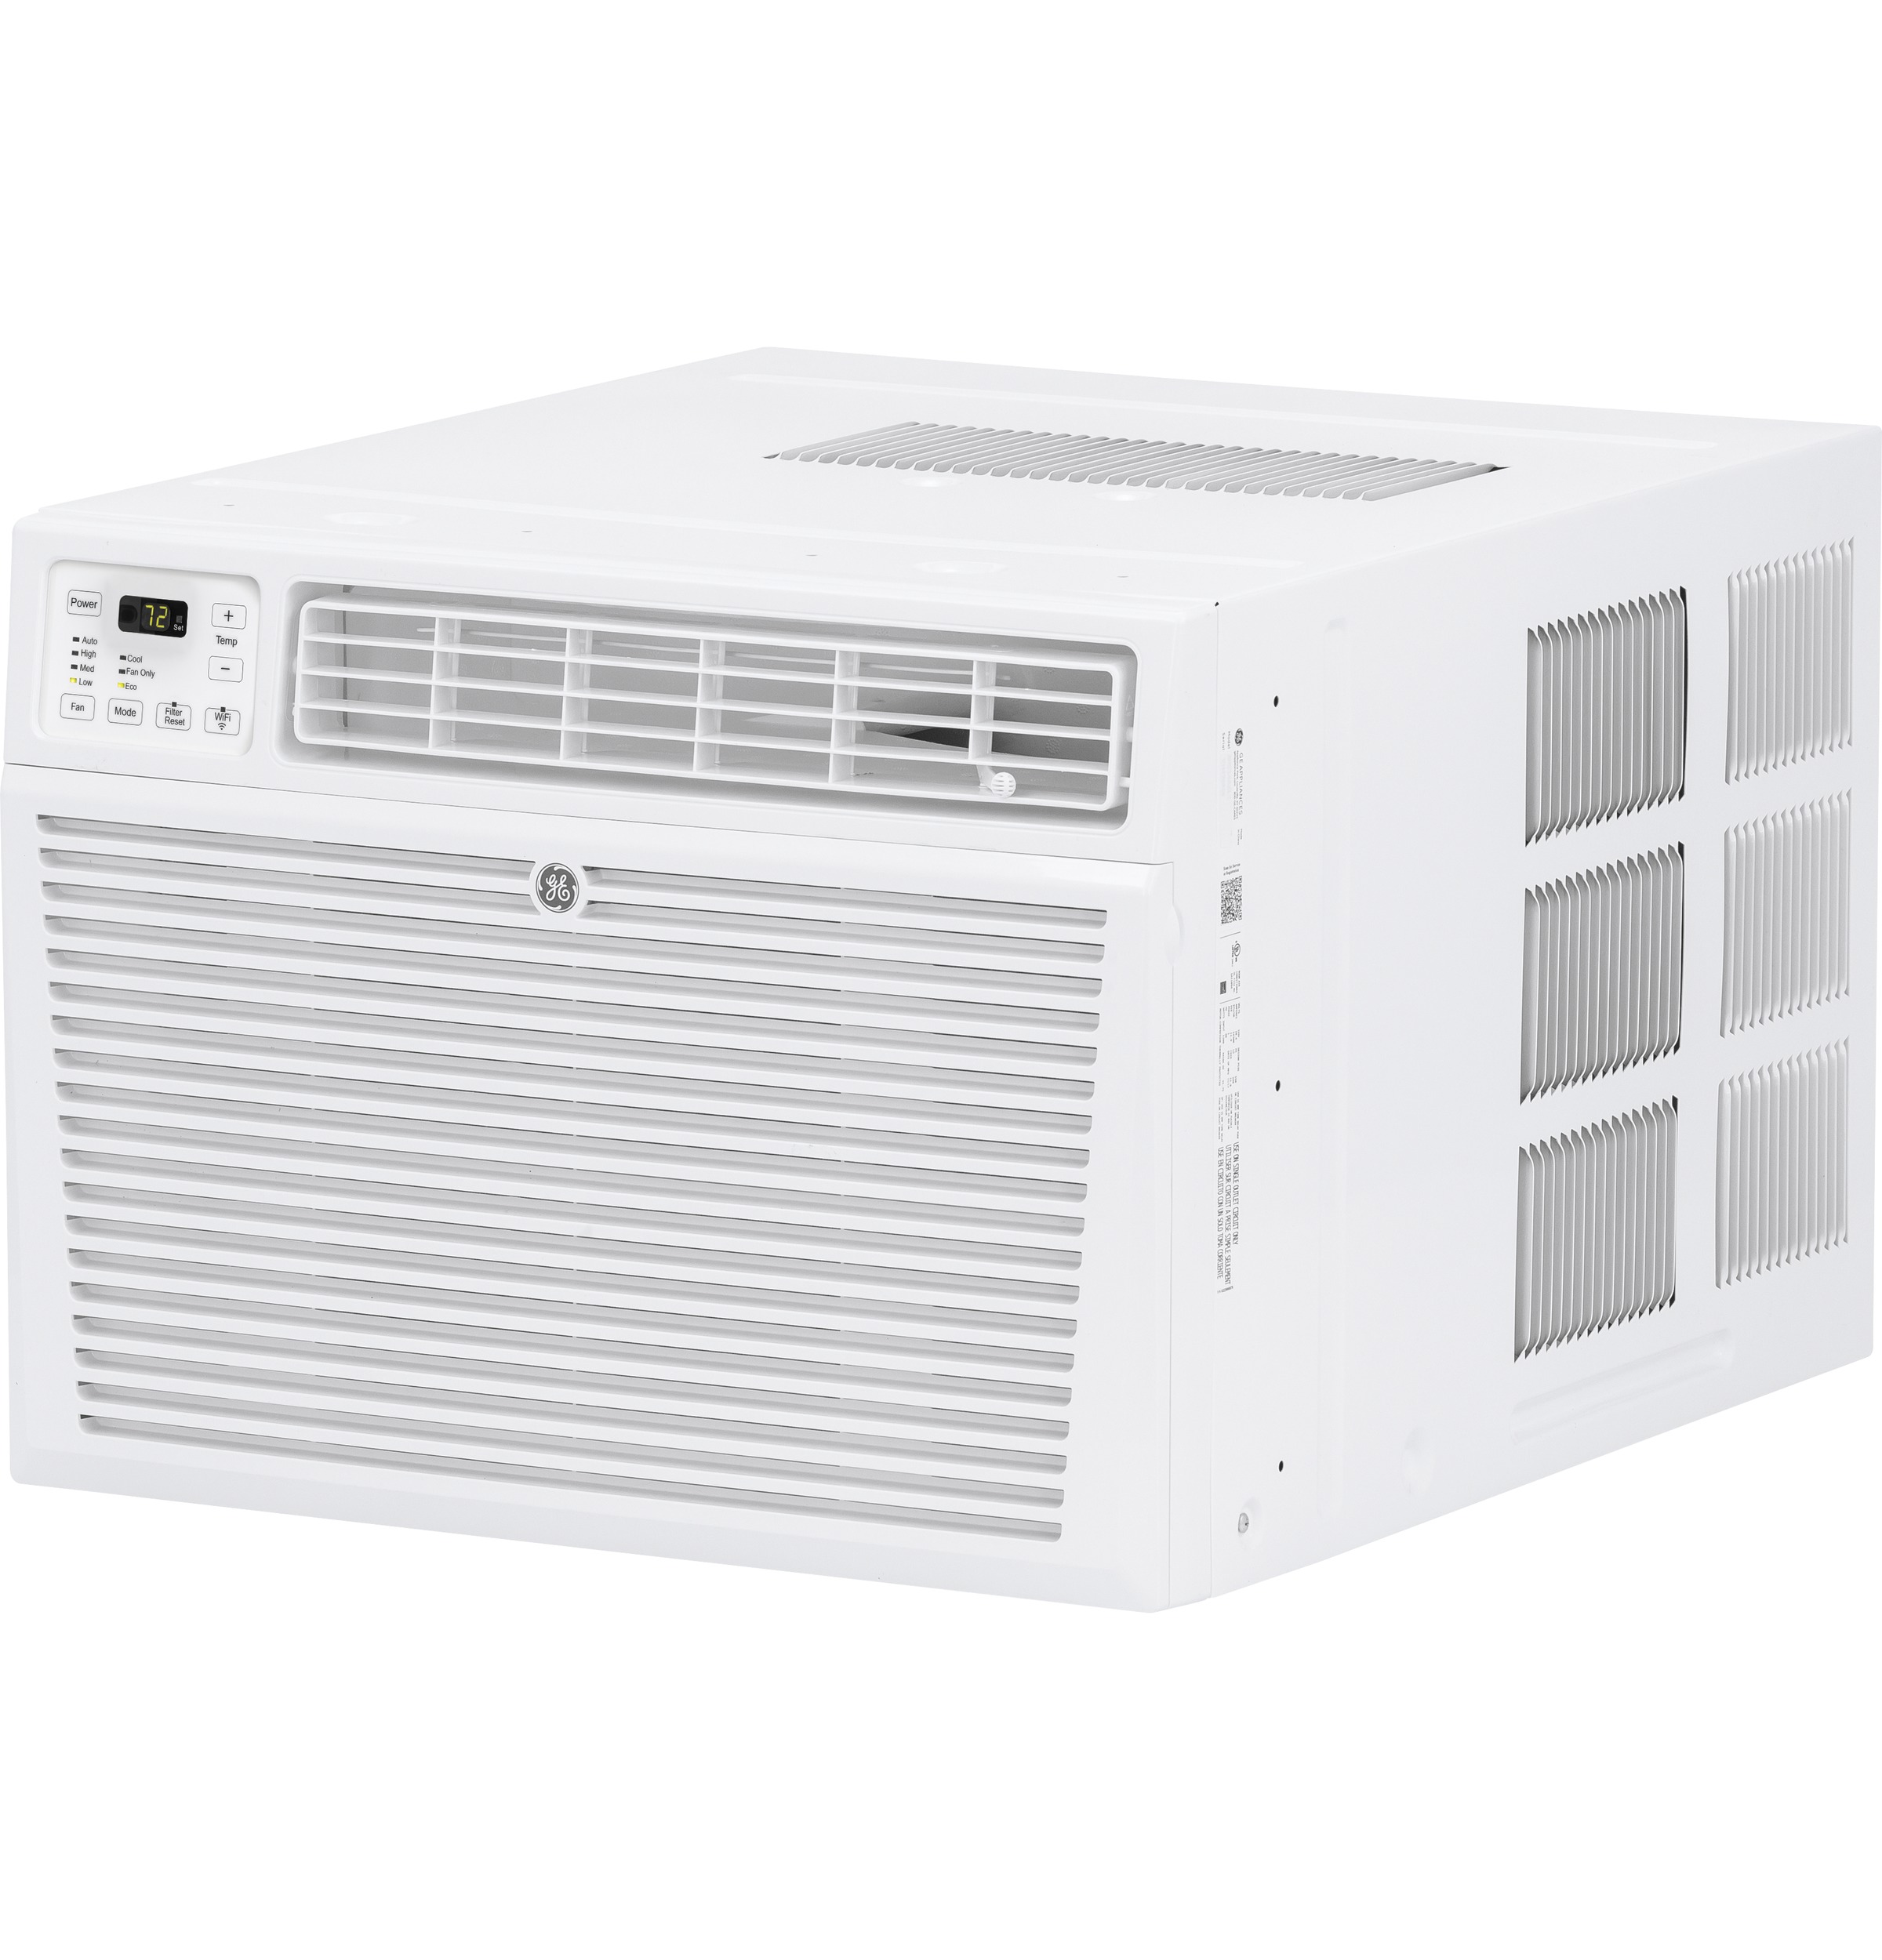 GE® ENERGY STAR® 115 Volt Smart Electronic Room Air Conditioner